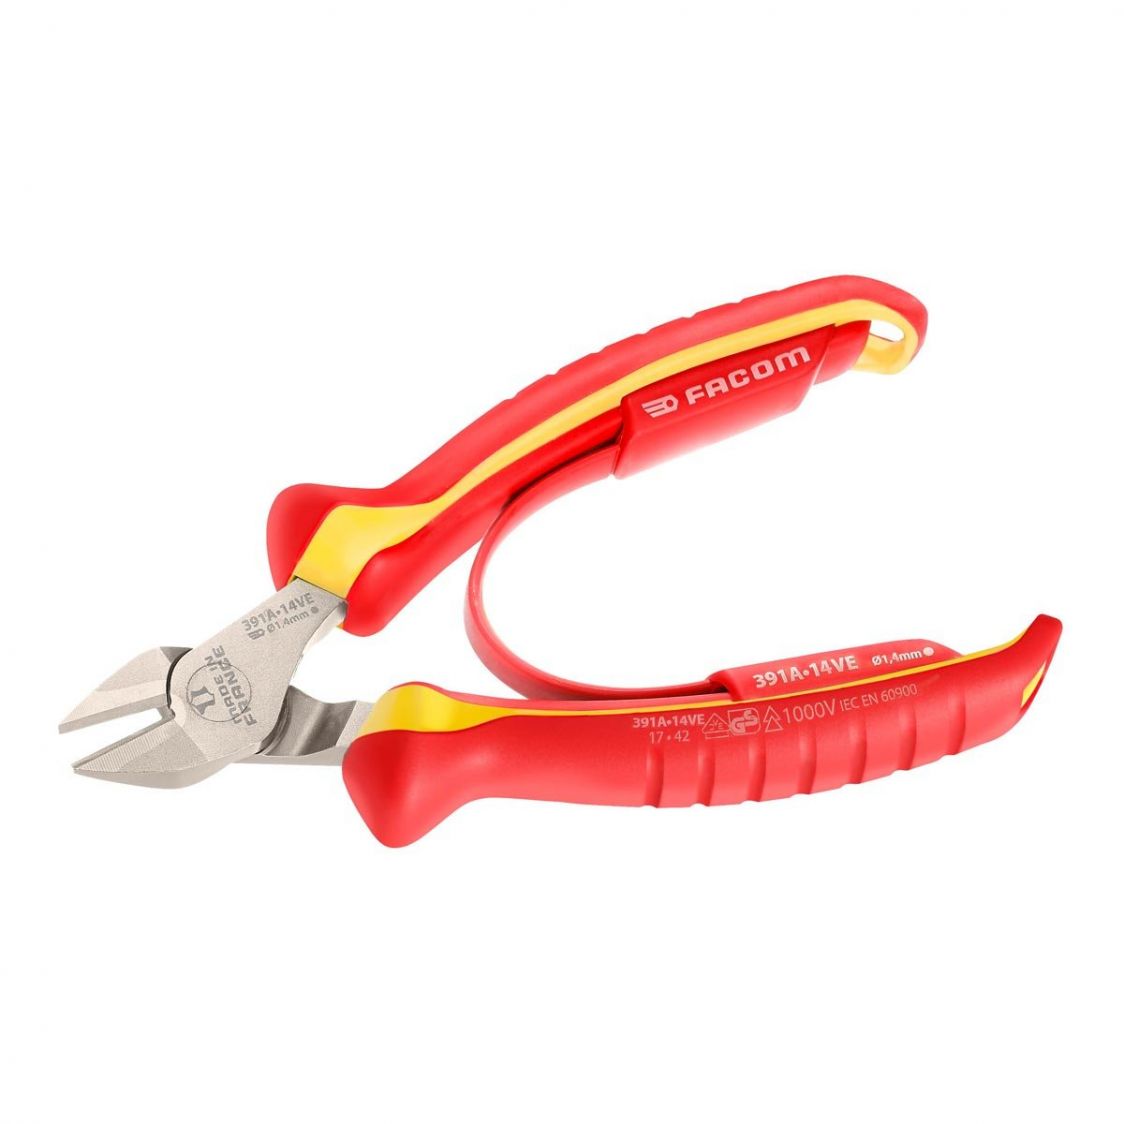 FACOM 391A.XVE - Insulated Diagonal Side Cutter Comfort Grip Pliers